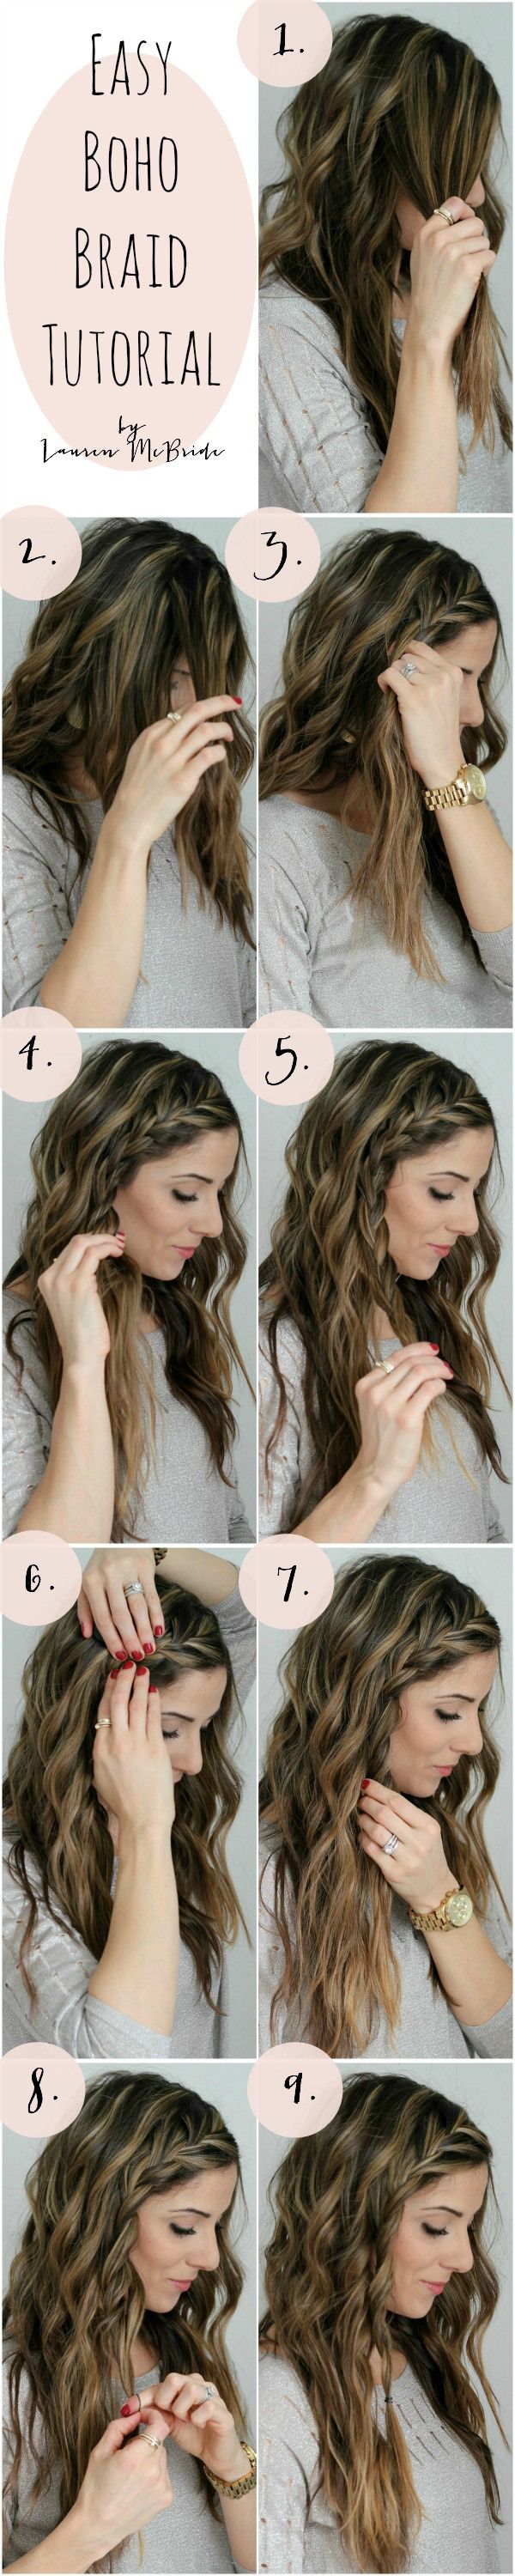 Simple And Easy 5 Minutes Hairstyle Tutorials